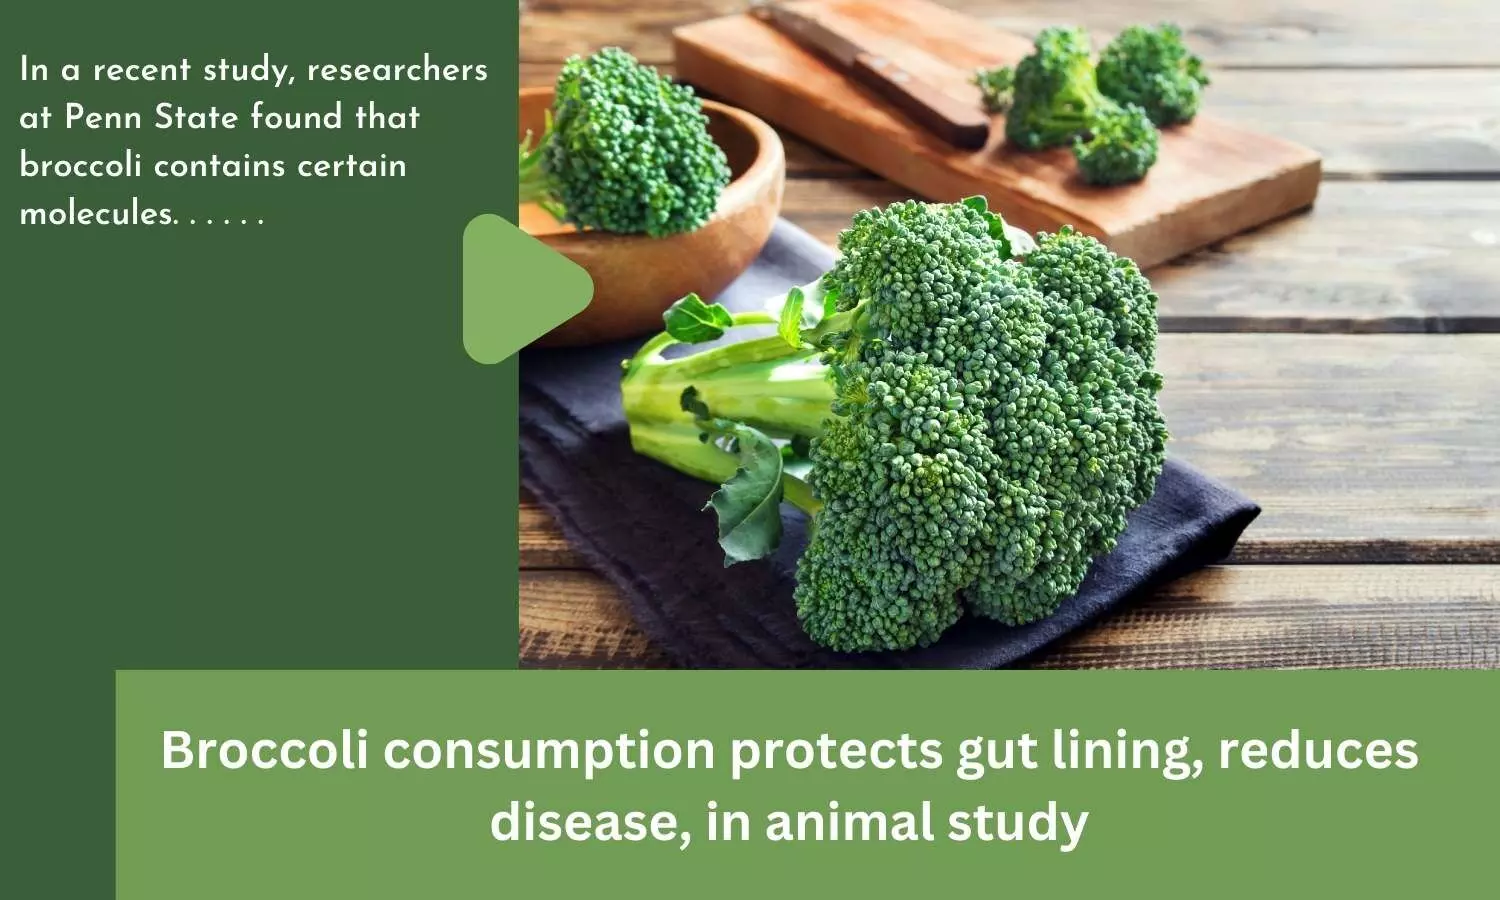 Broccoli consumption protects gut lining, reduces disease, in animal study